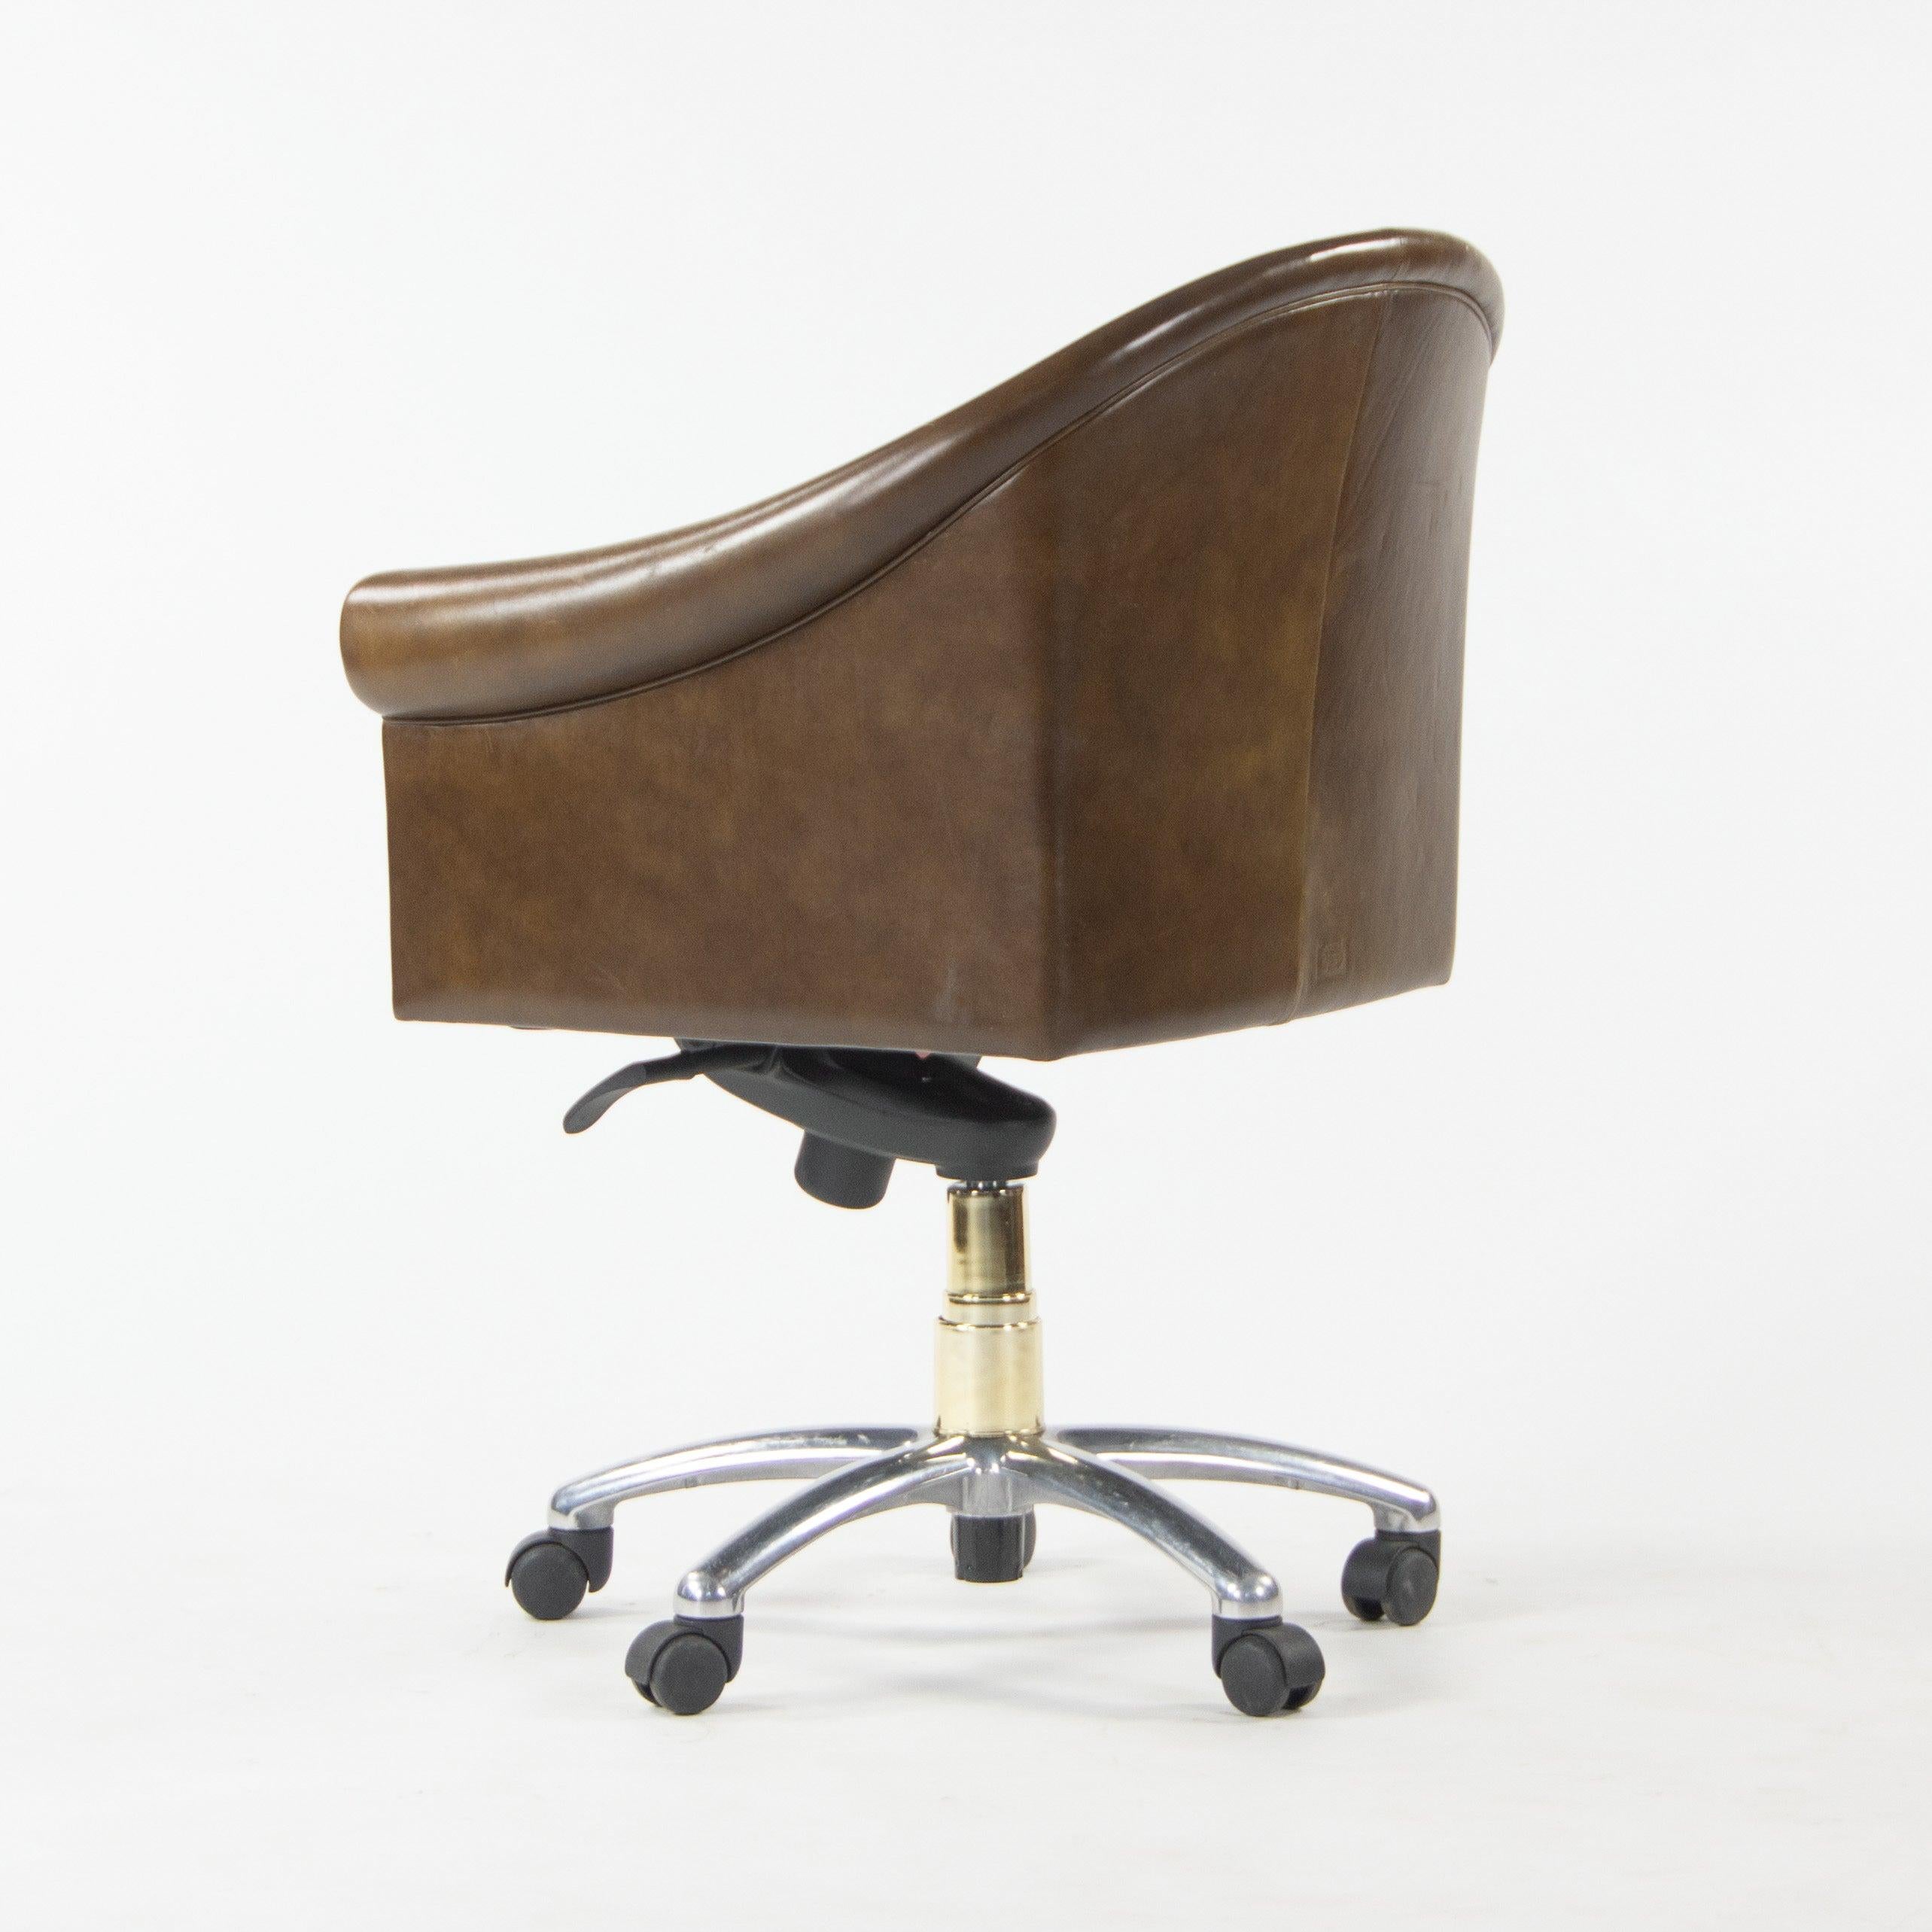 Poltrona Frau Brown Leather Luca Scacchetti Sinan Office Desk Chair In Good Condition For Sale In Philadelphia, PA